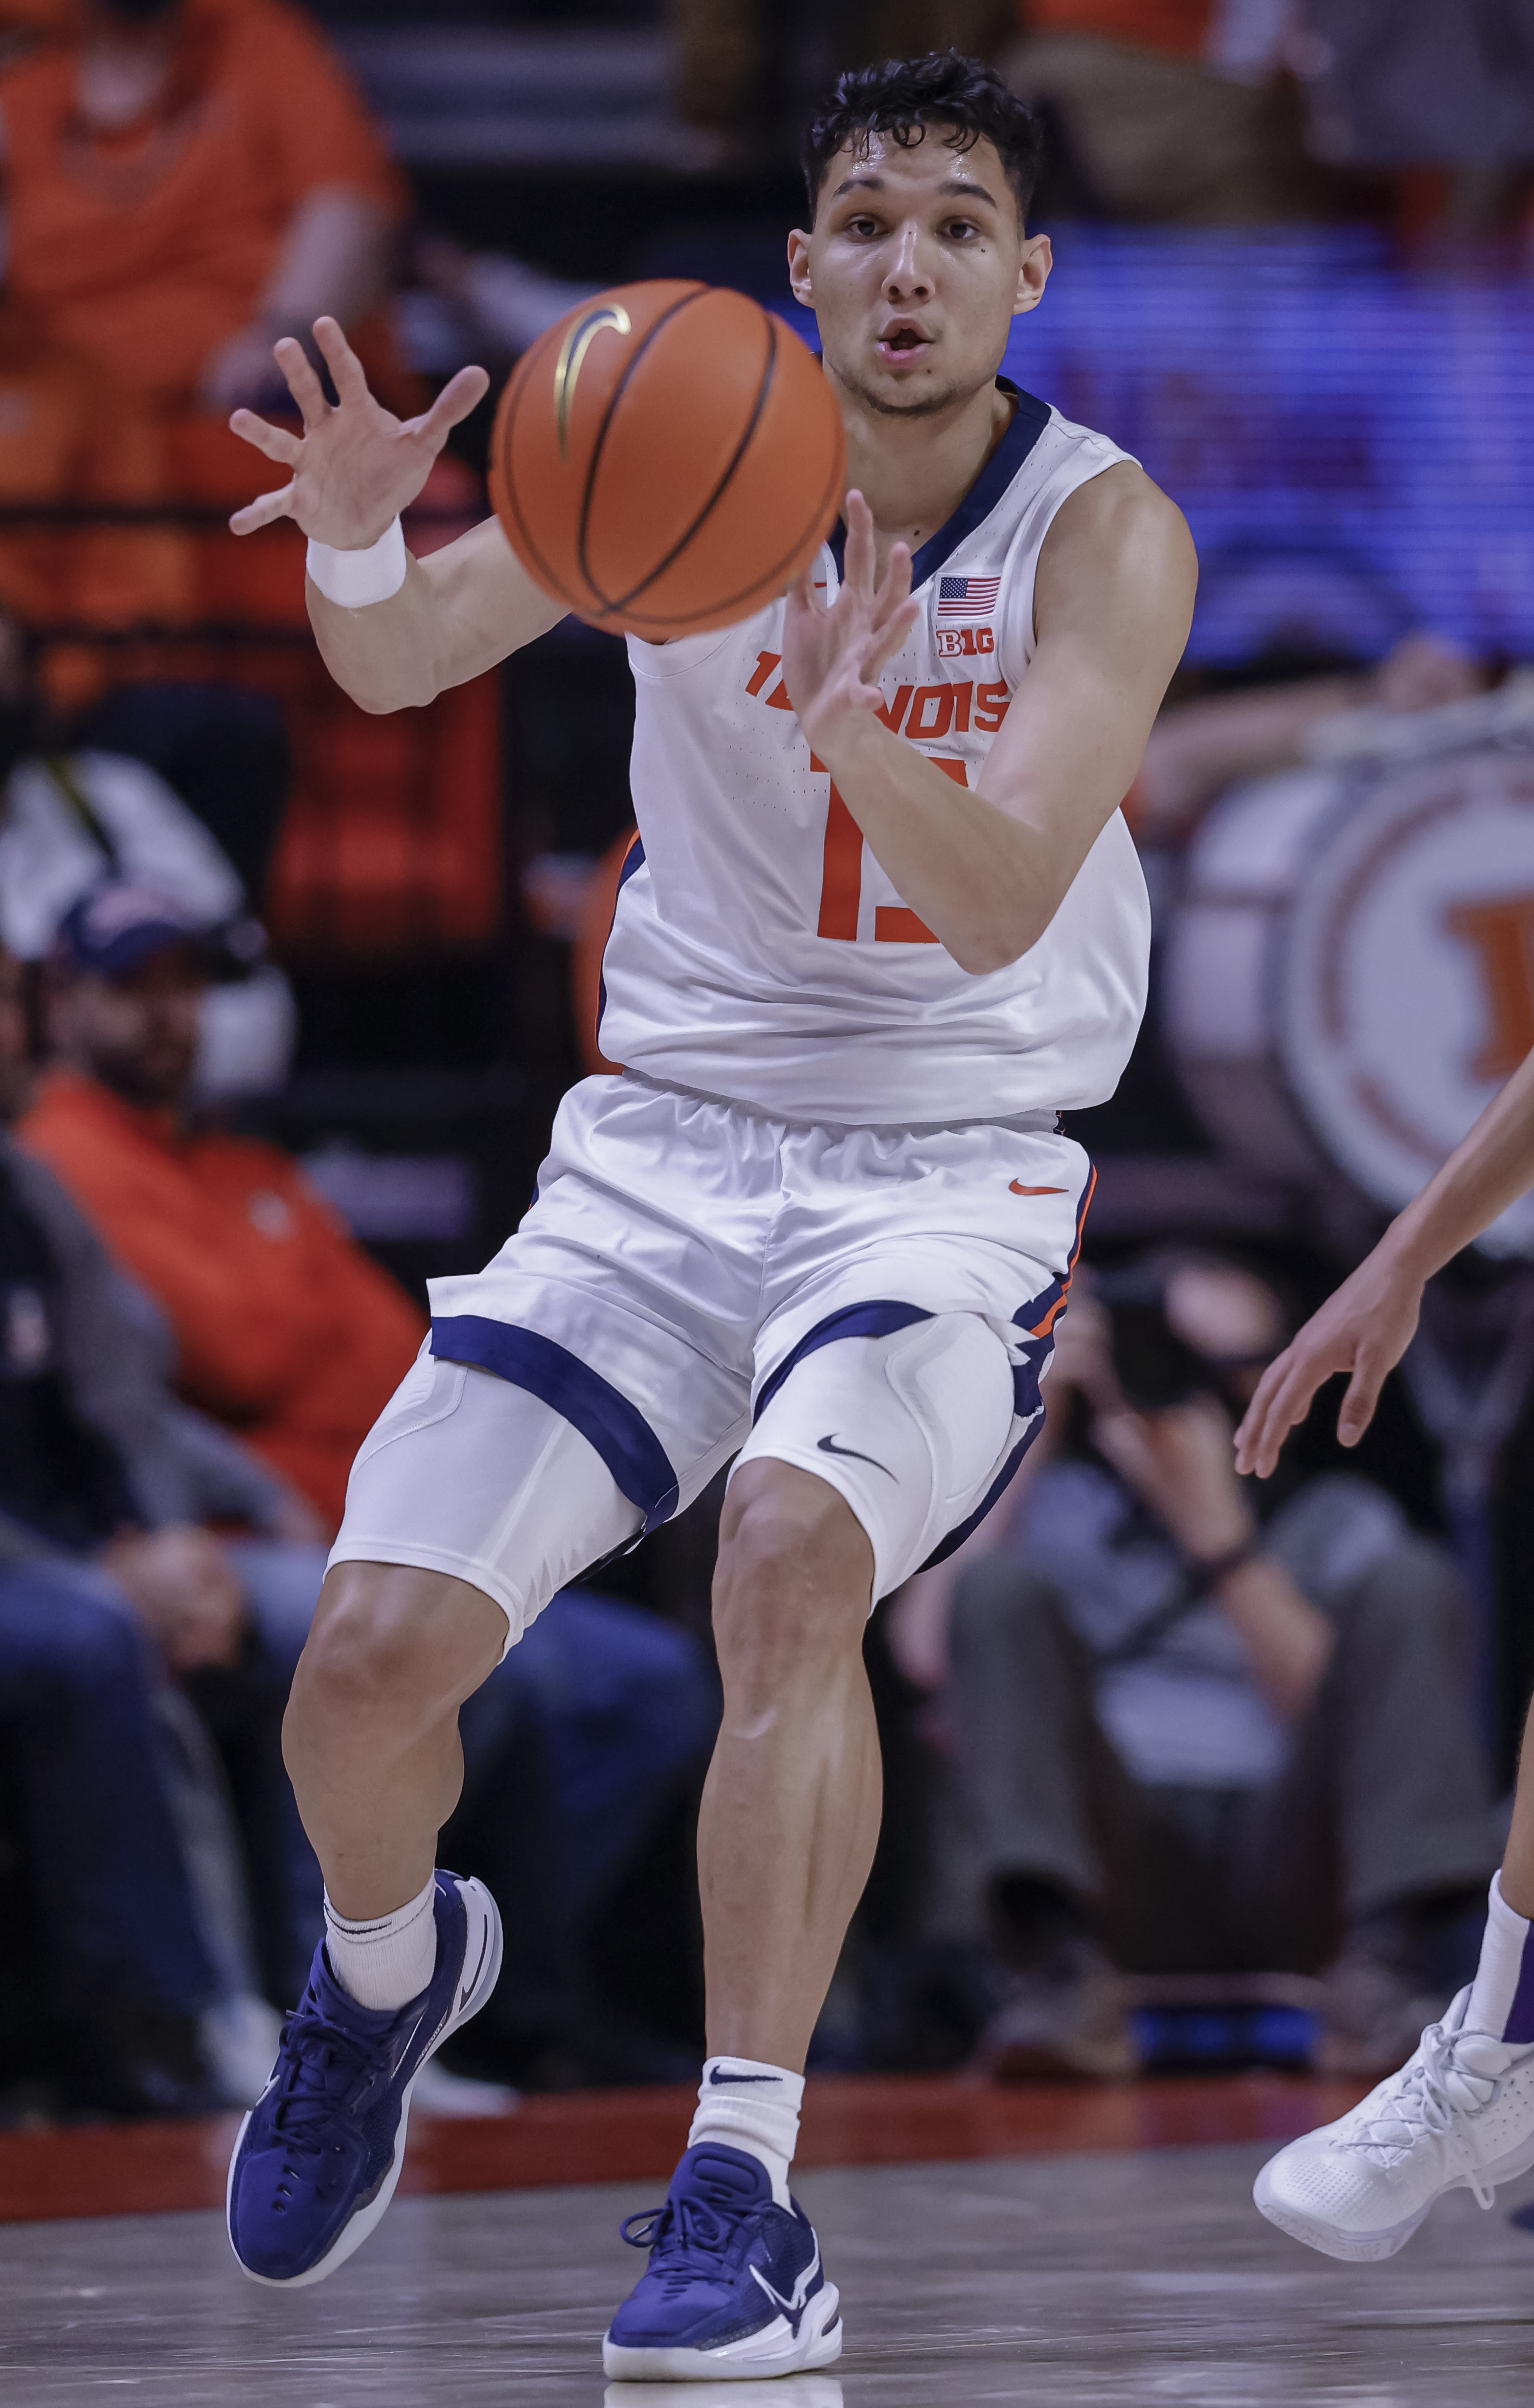 Illinois vs Rutgers Prediction, Odds, Moneyline, Spread & Over/Under for February 16 College Basketball Game